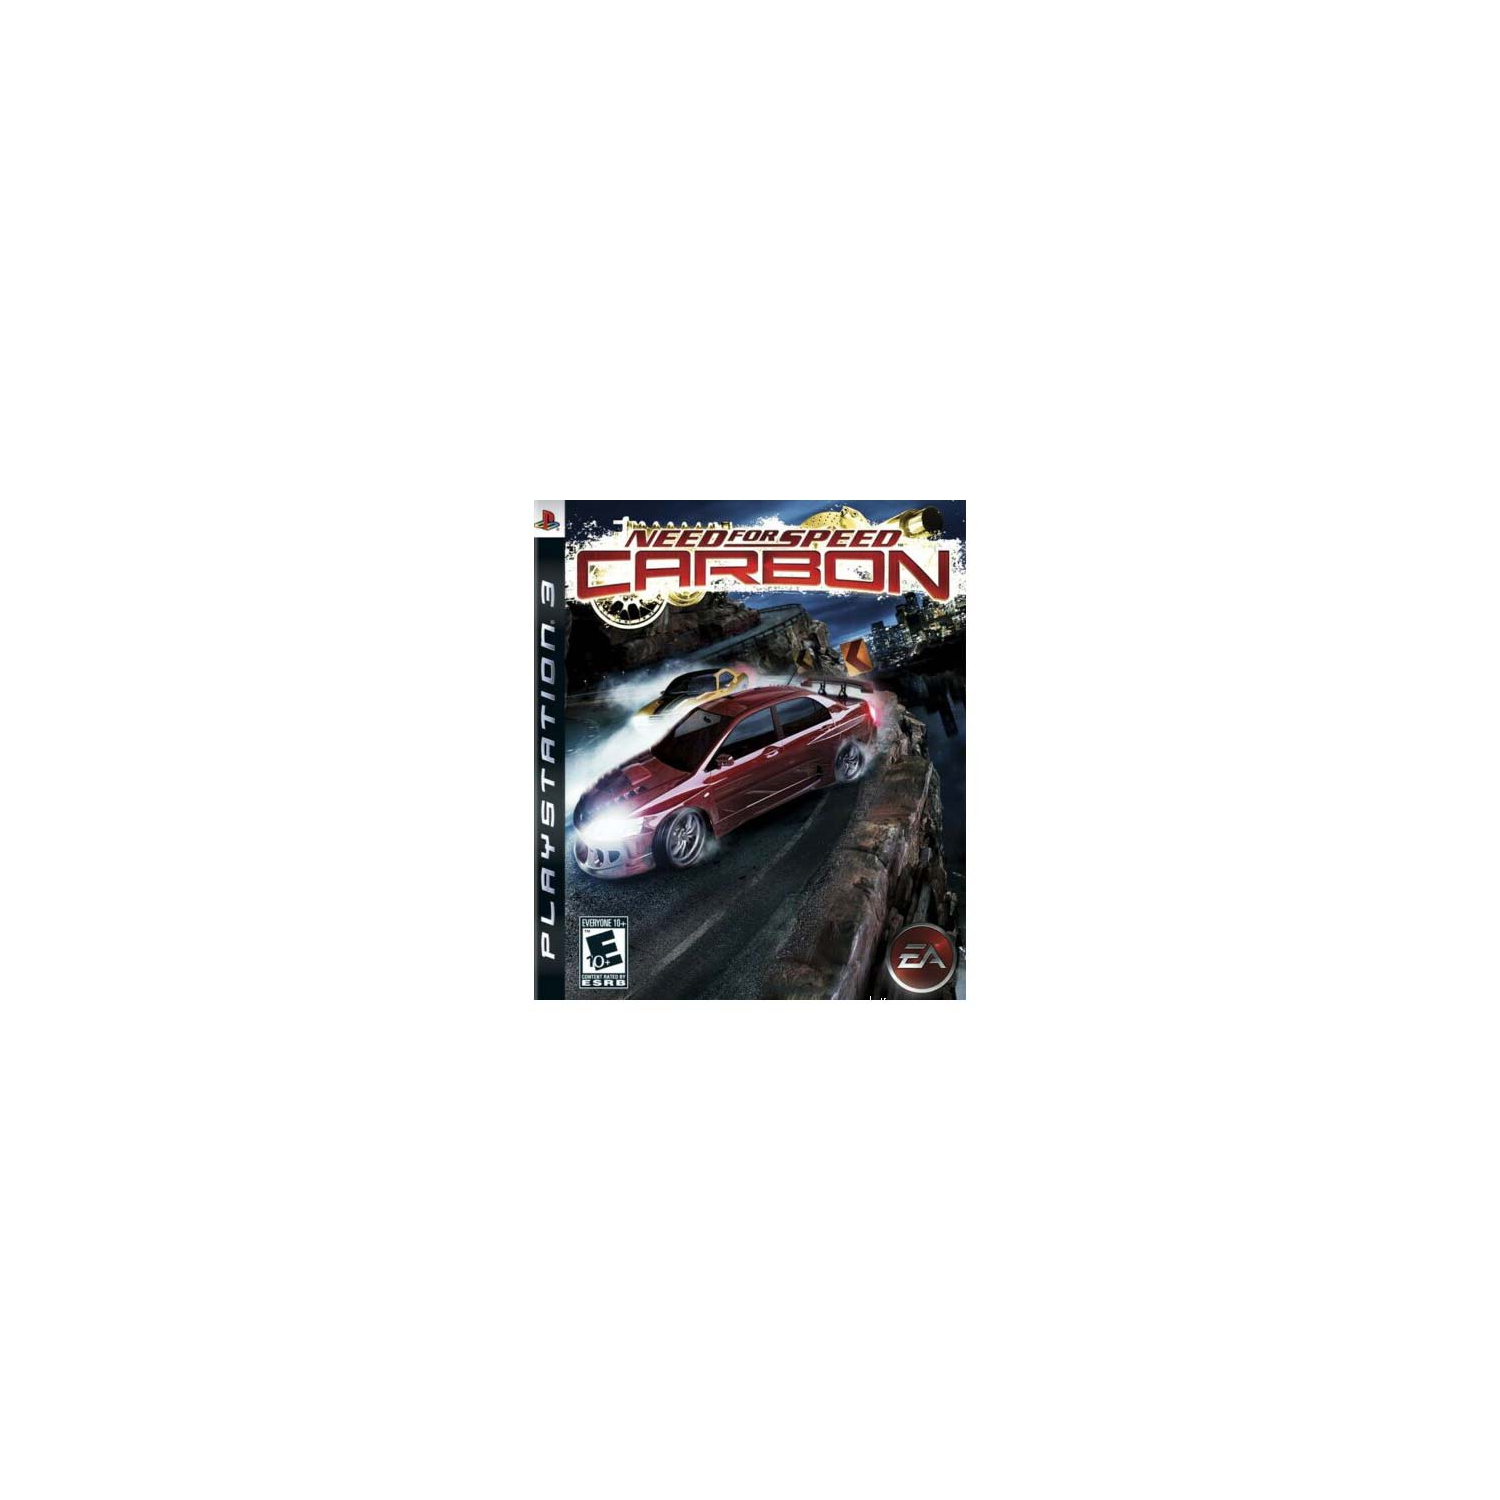 NEED FOR SPEED CARBON - PlayStation 3, Brand New